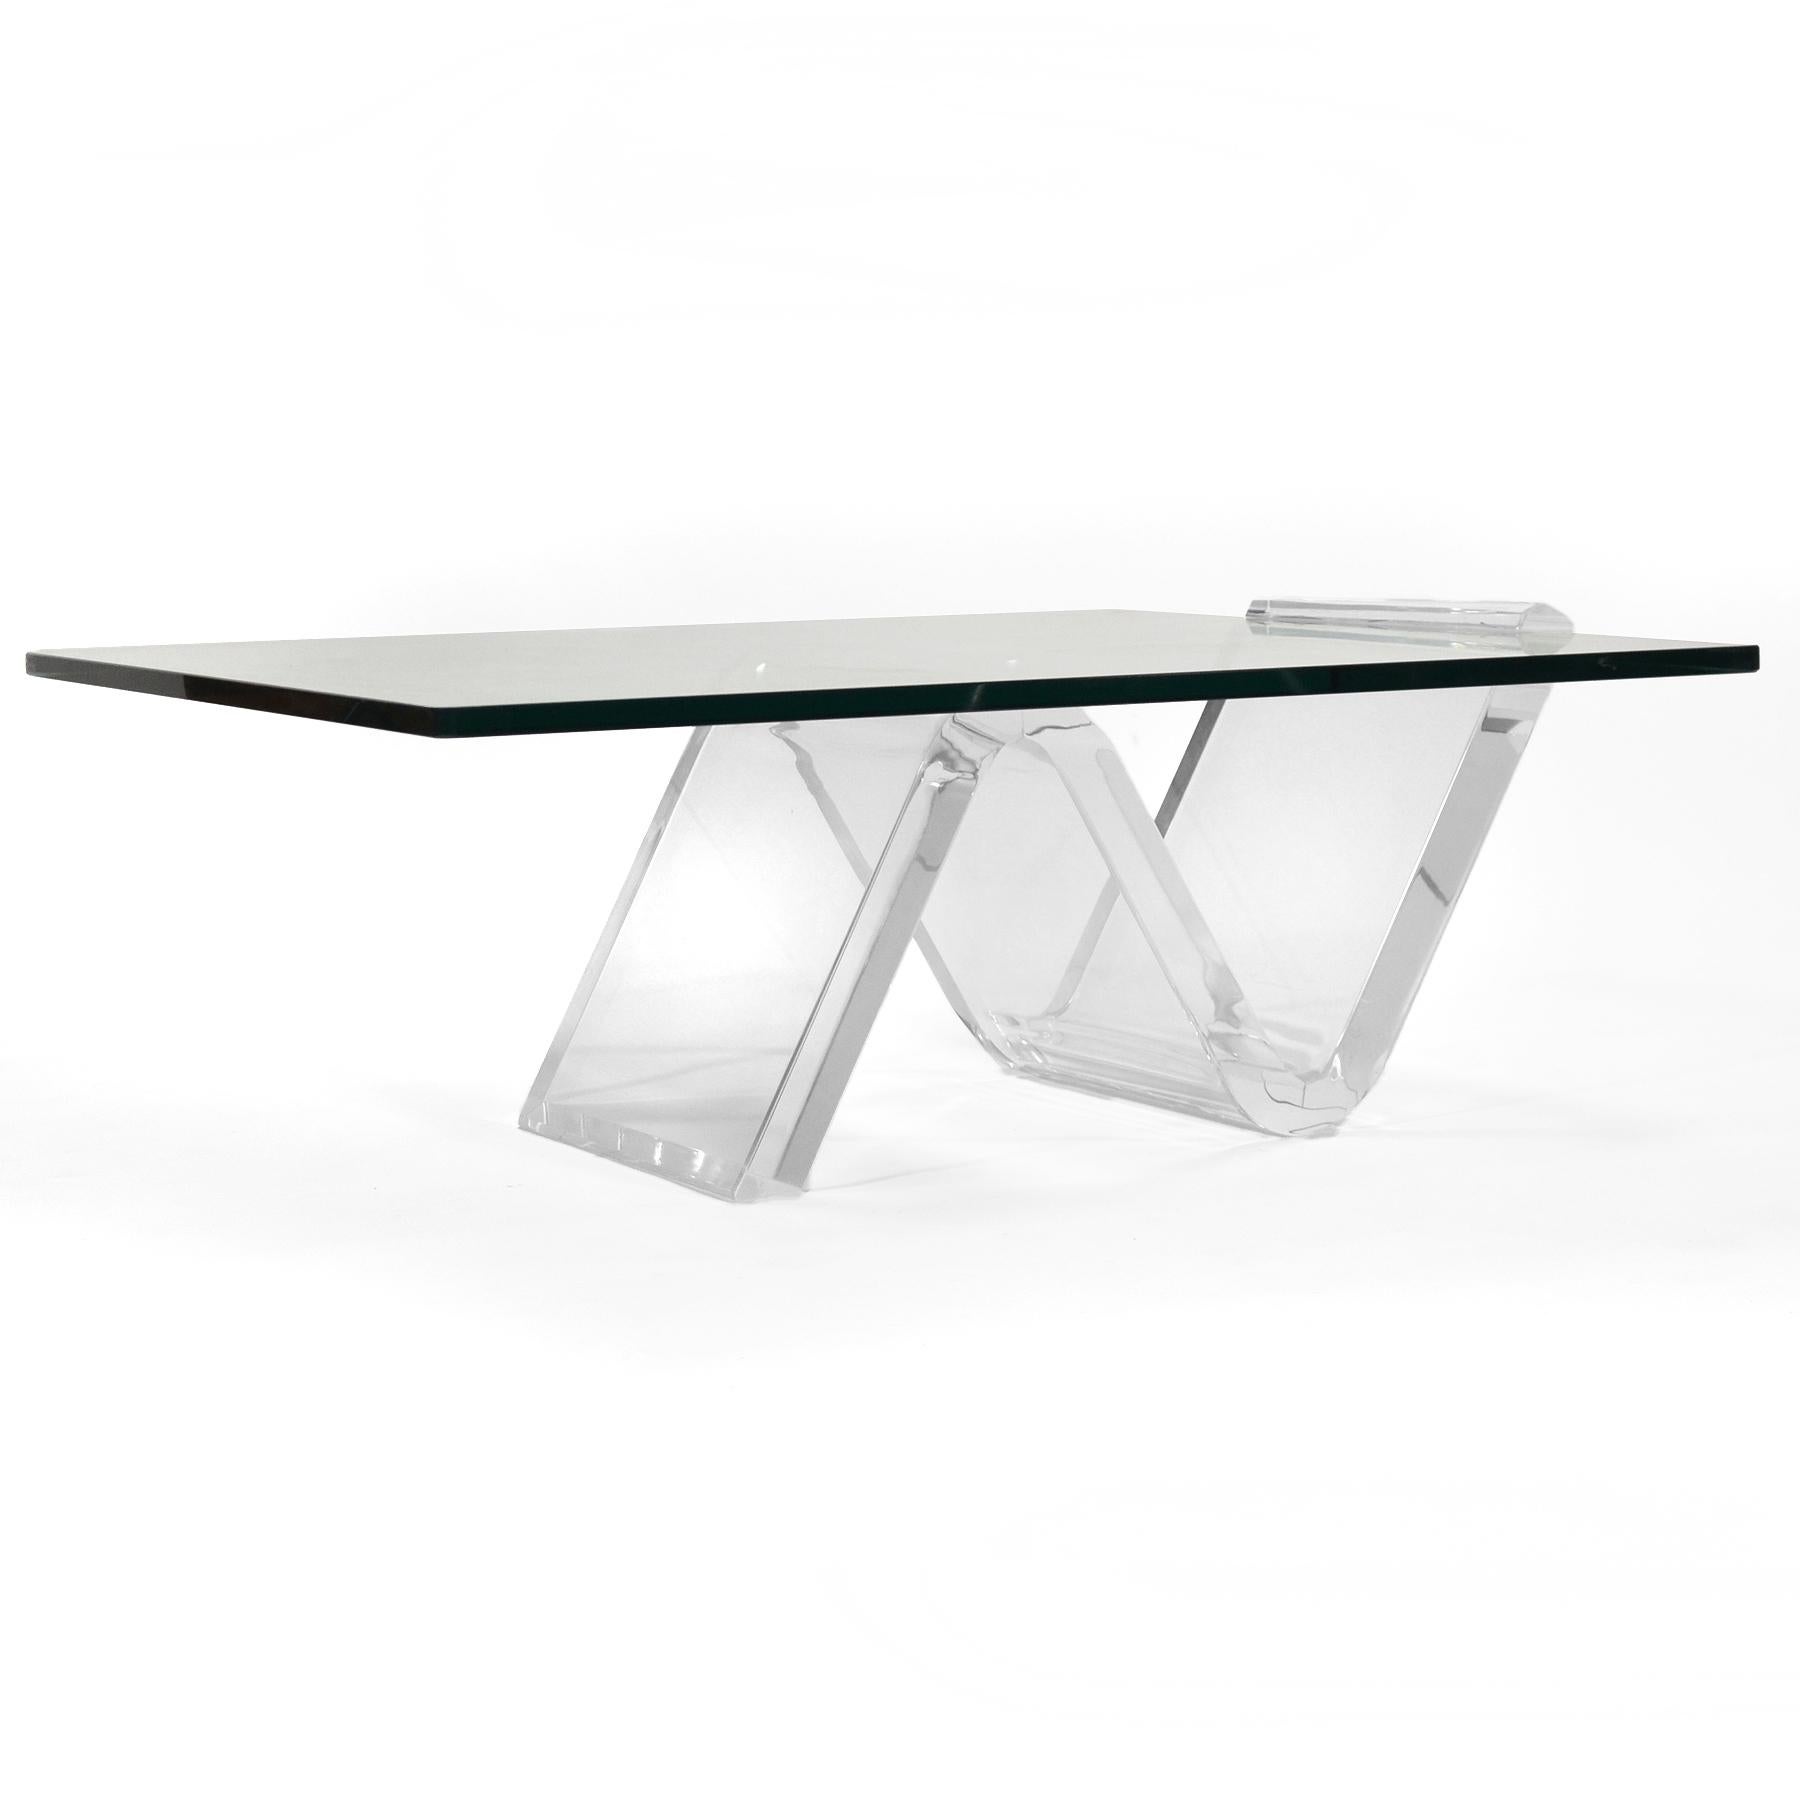 A delightful and dramatic design, this coffee table has a thick glass top cleverly supported and held by the sculptural zig-zag shaped Lucite base.